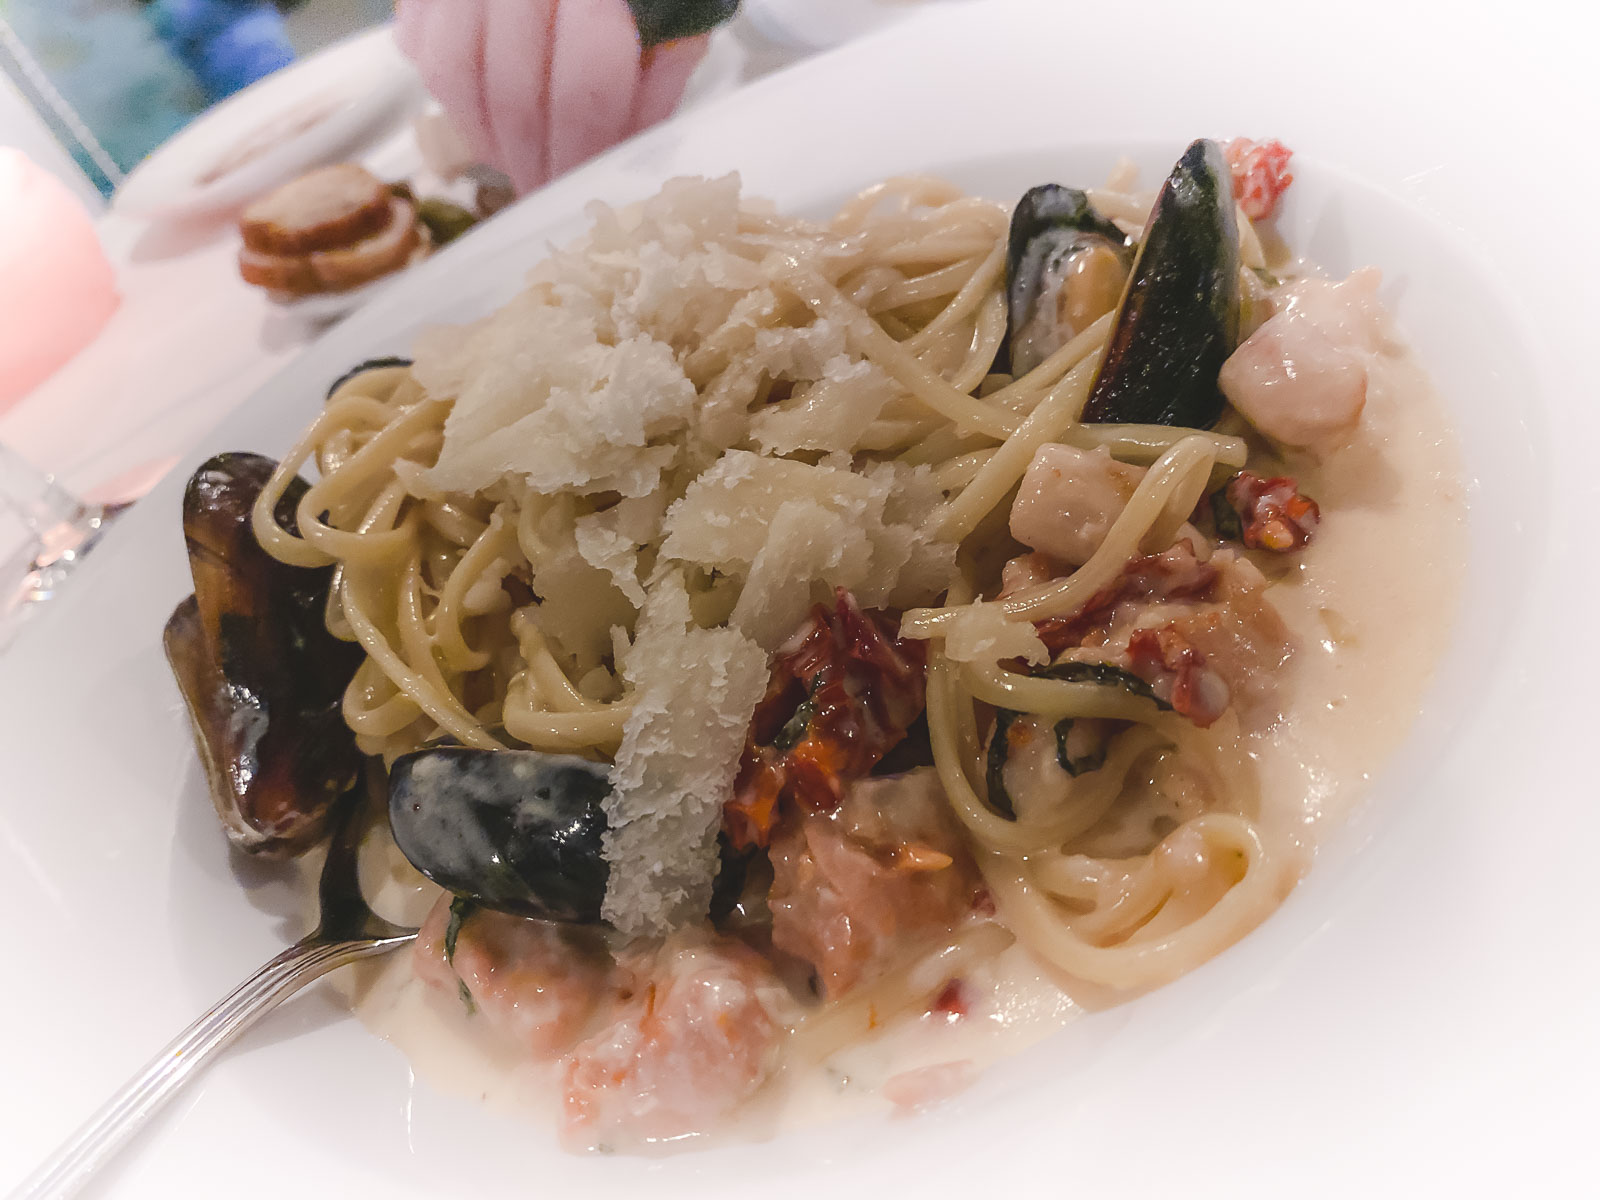 seafood pasta with parmesean cheese, mussels and scallops at lighthouse pub sunshine coast bc